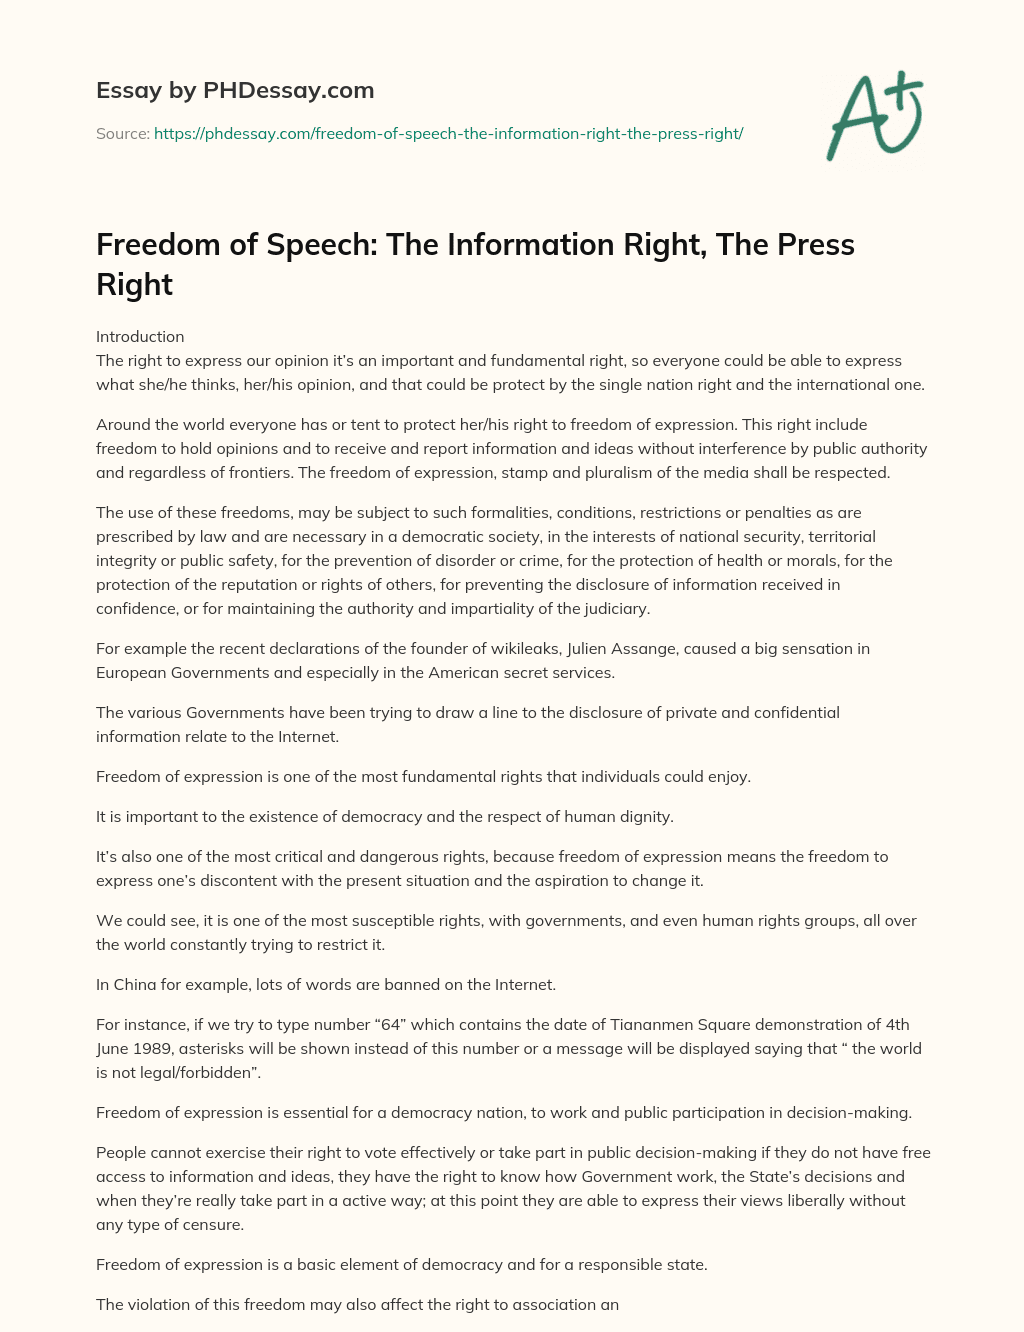 Freedom of Speech: The Information Right, The Press Right essay